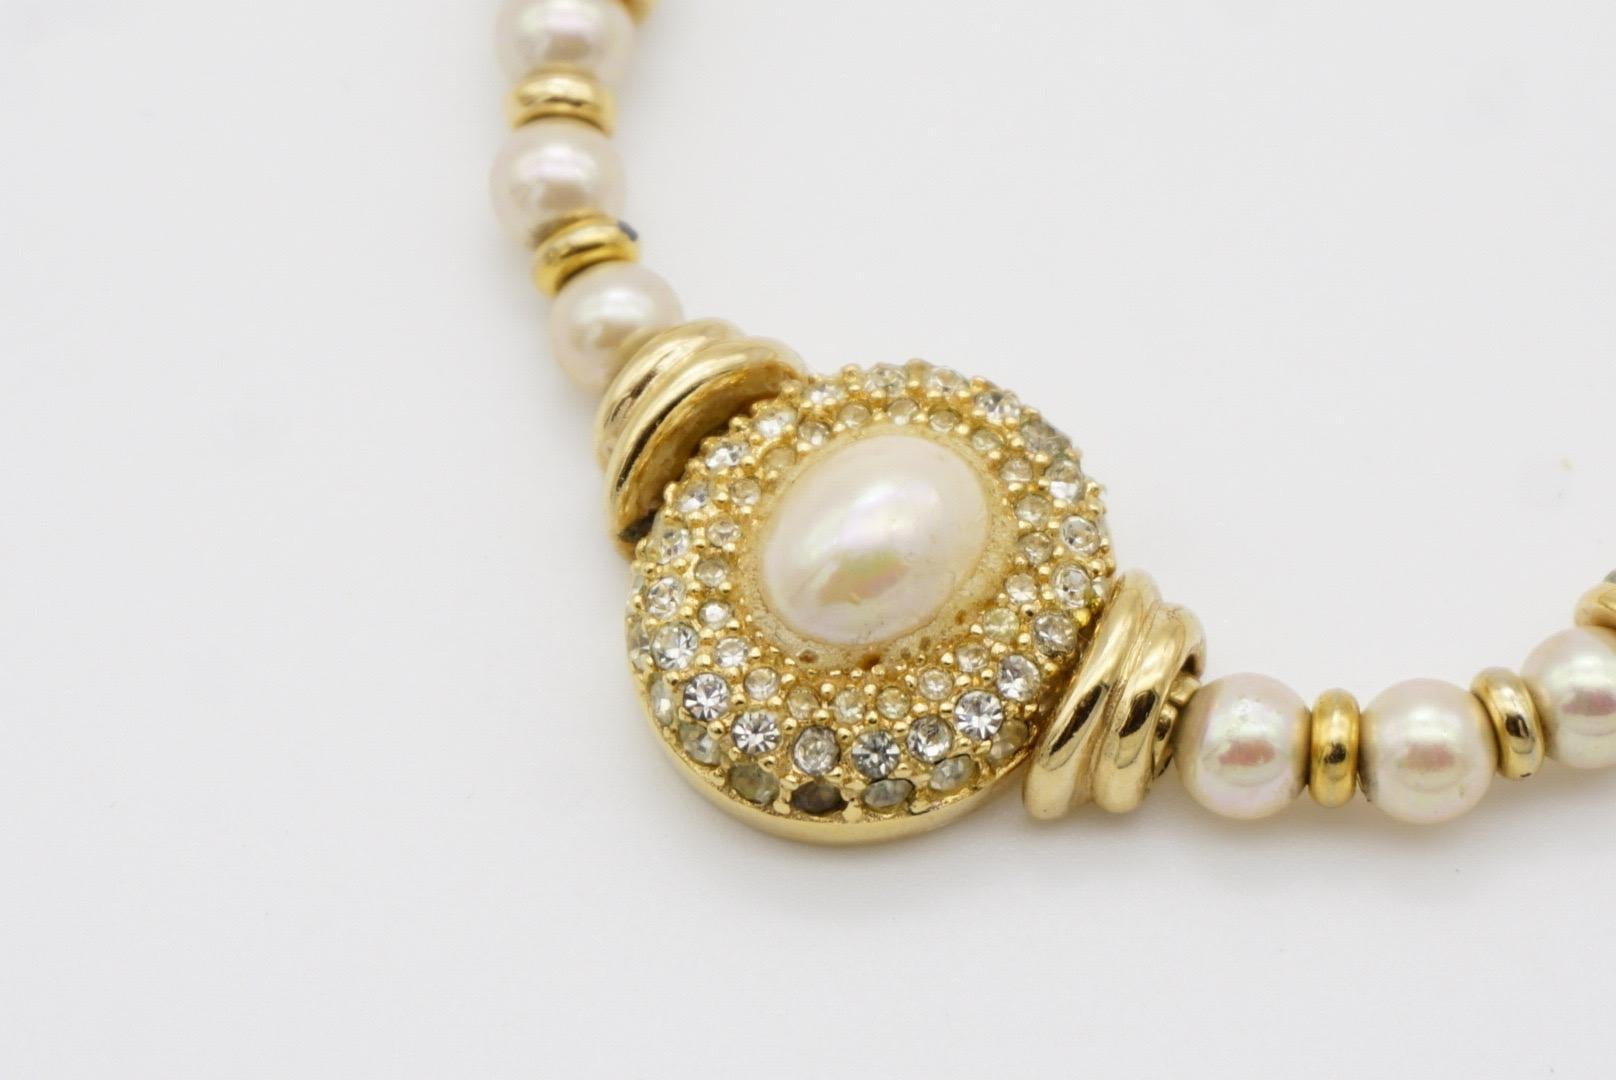 Christian Dior GROSSE 1960s White Oval Crystals Pendant Beaded Pearls Necklace For Sale 8